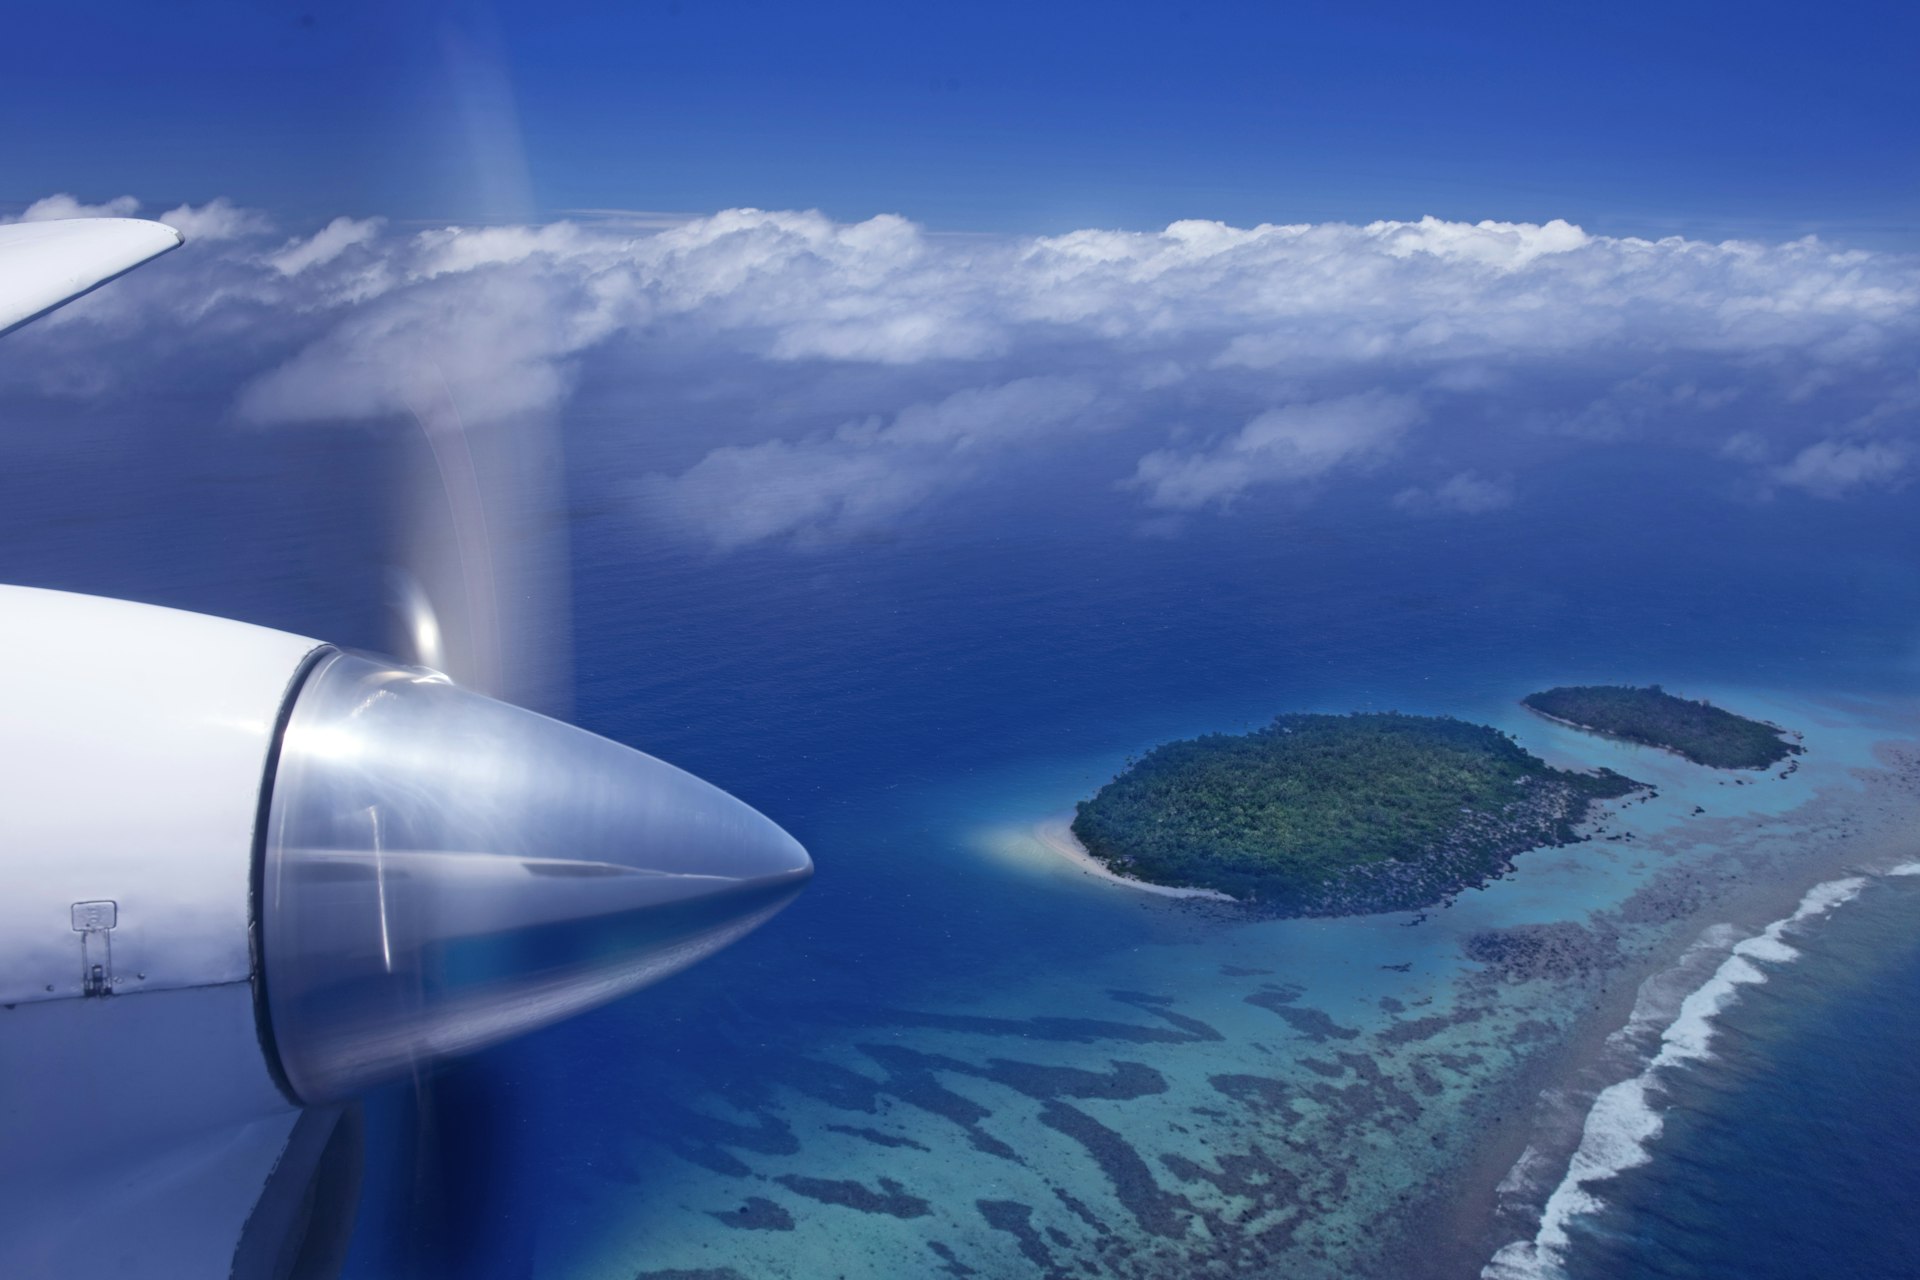 A view of the islands from a propeller plane